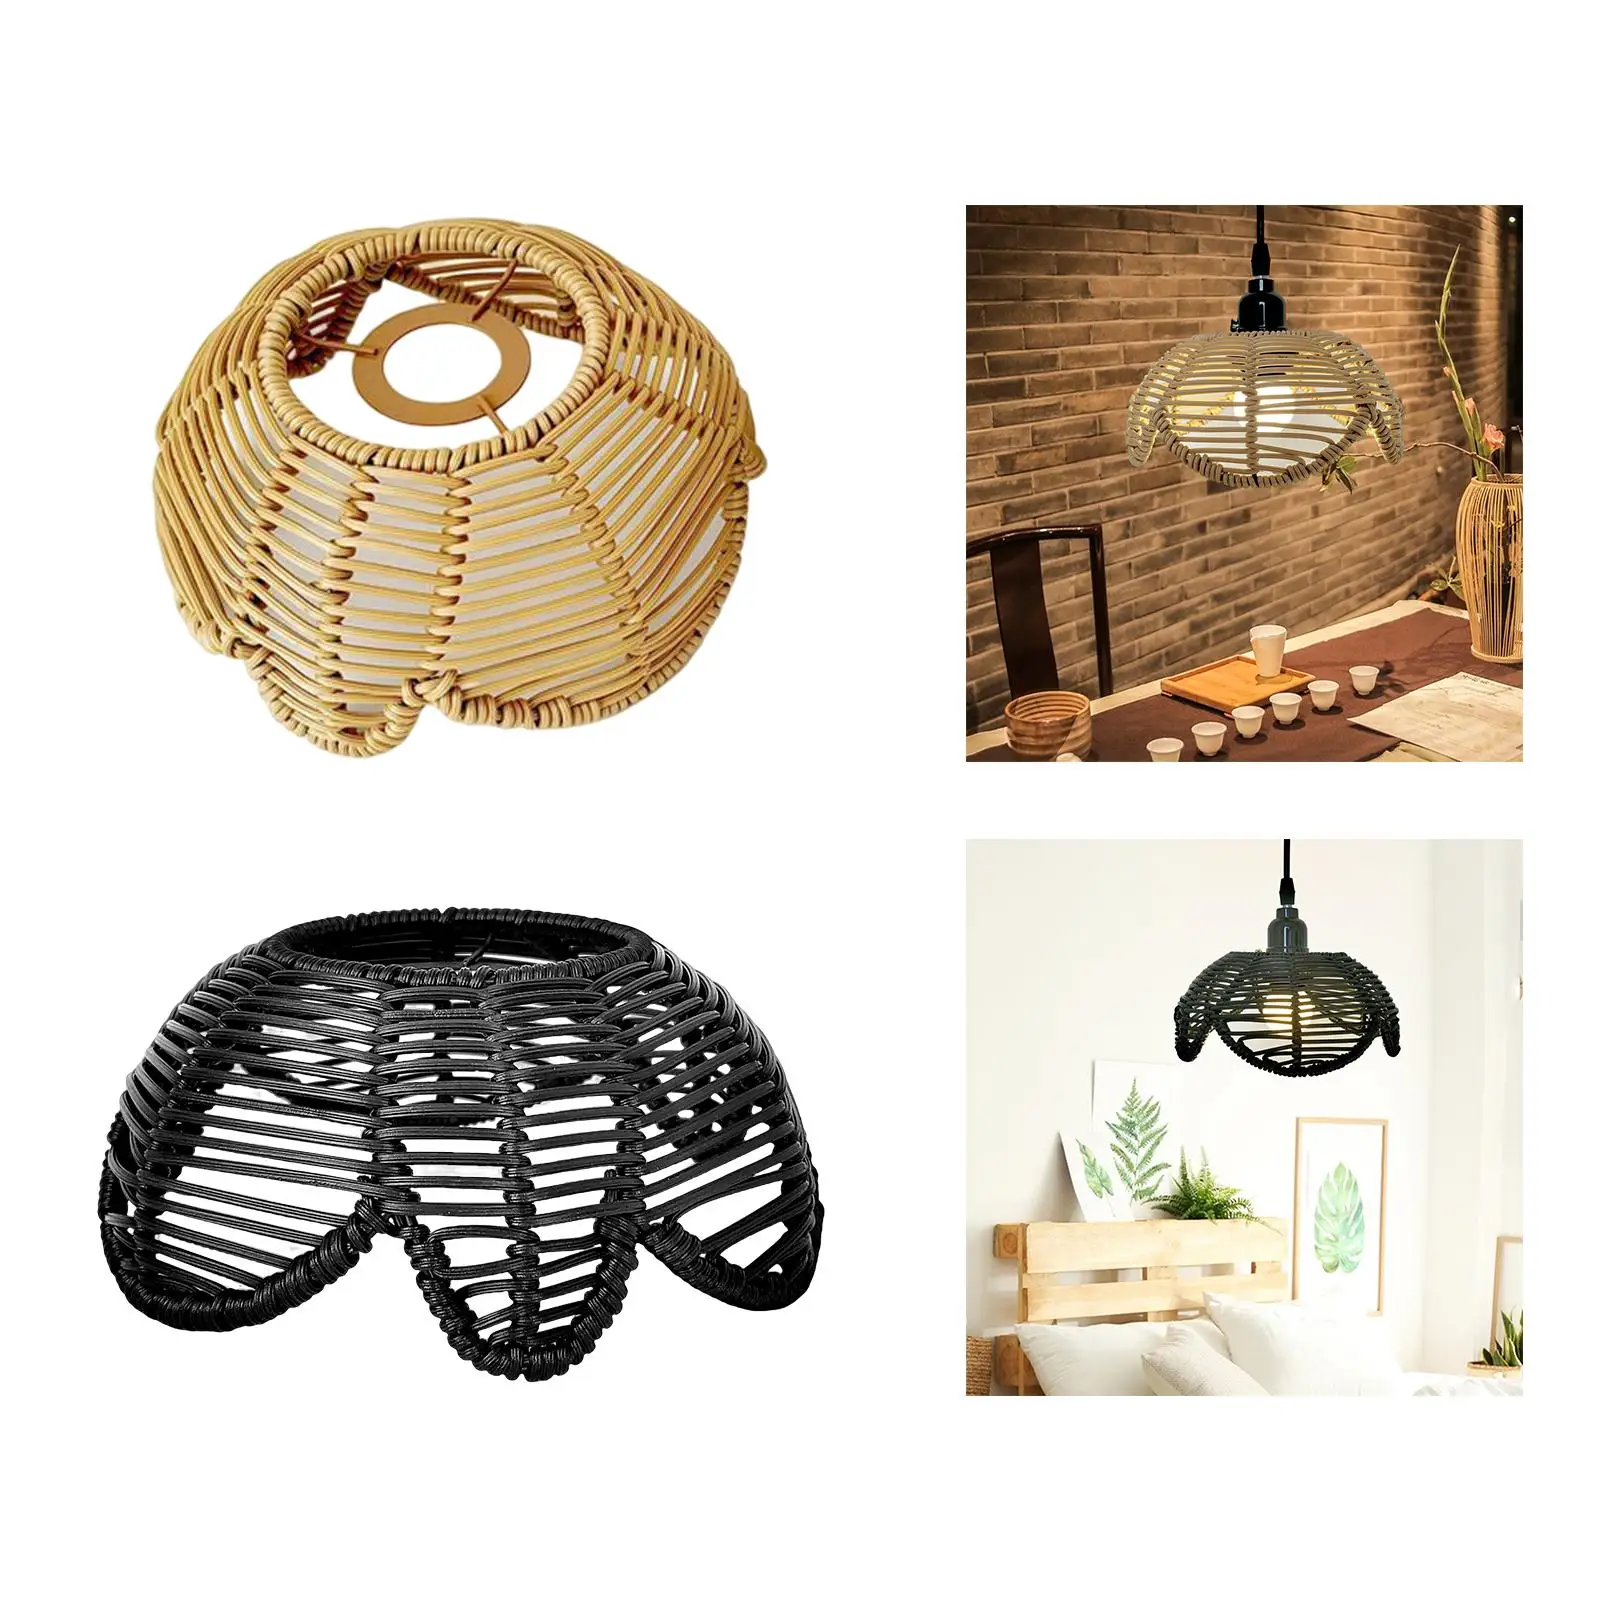 Lotus Shape Rattan Lamp Shade Ornament Droplight Chandelier Cover Ceiling Pendant Light Cover for Bedroom Teahouse Living Room